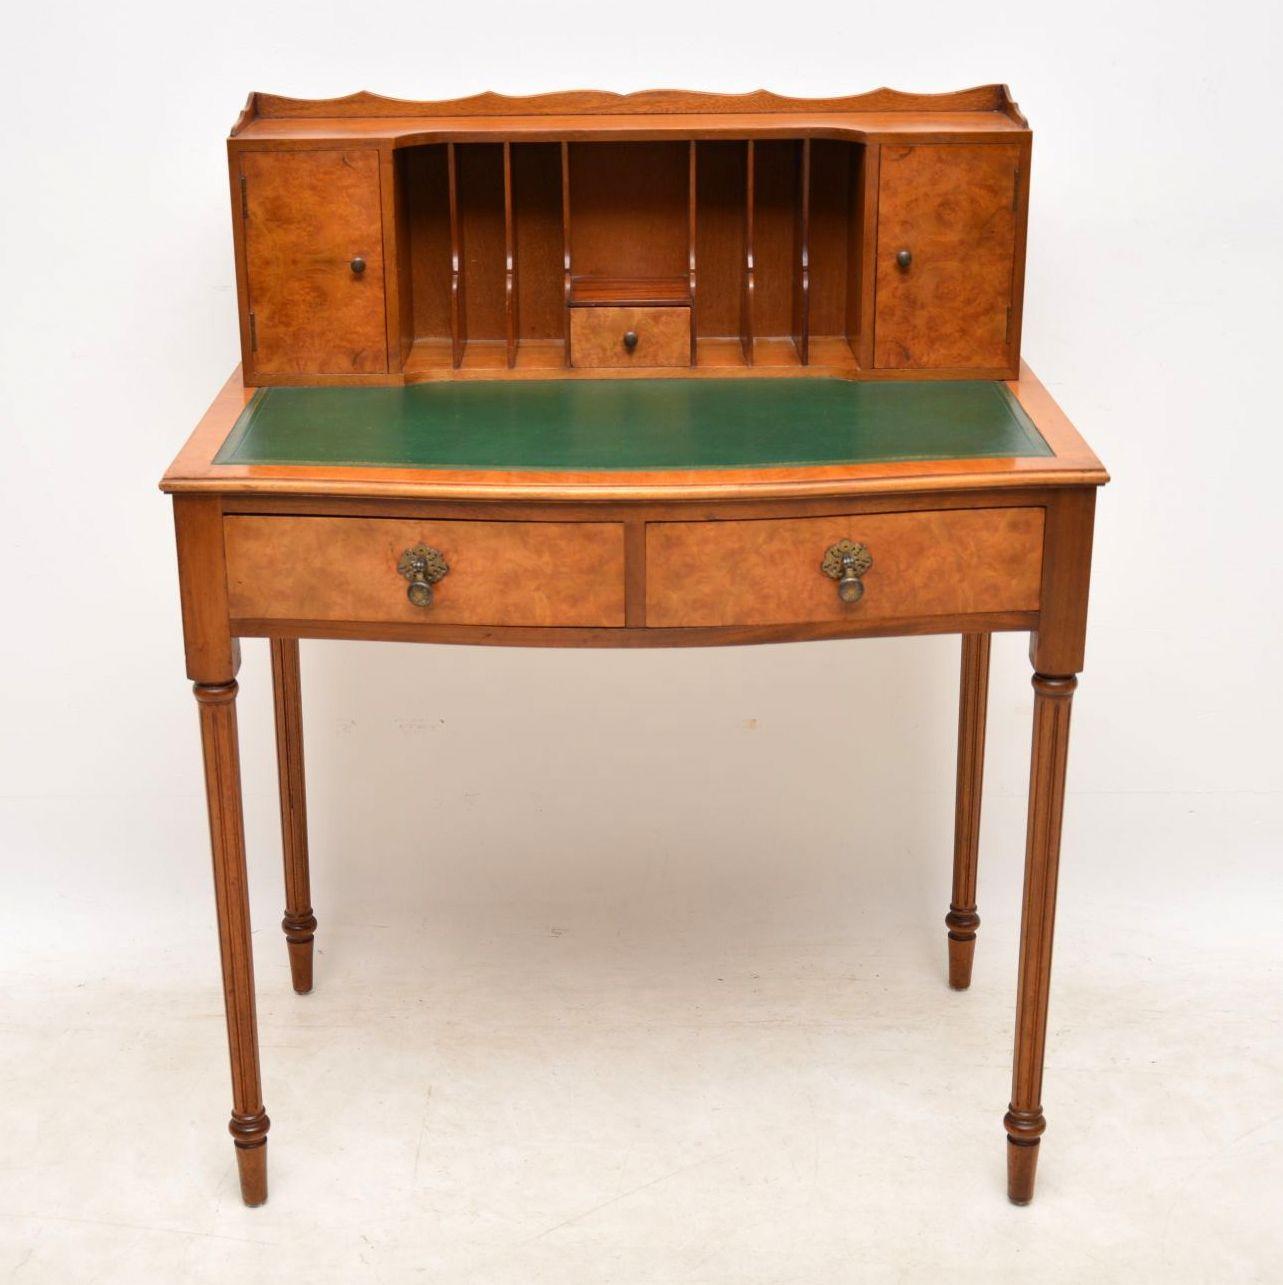 This antique burr walnut writing table desk is in good condition and has some useful features. The top section has two cupboards, a small central drawer and shaped compartments. The tooled leather writing surface is original. There are two drawers